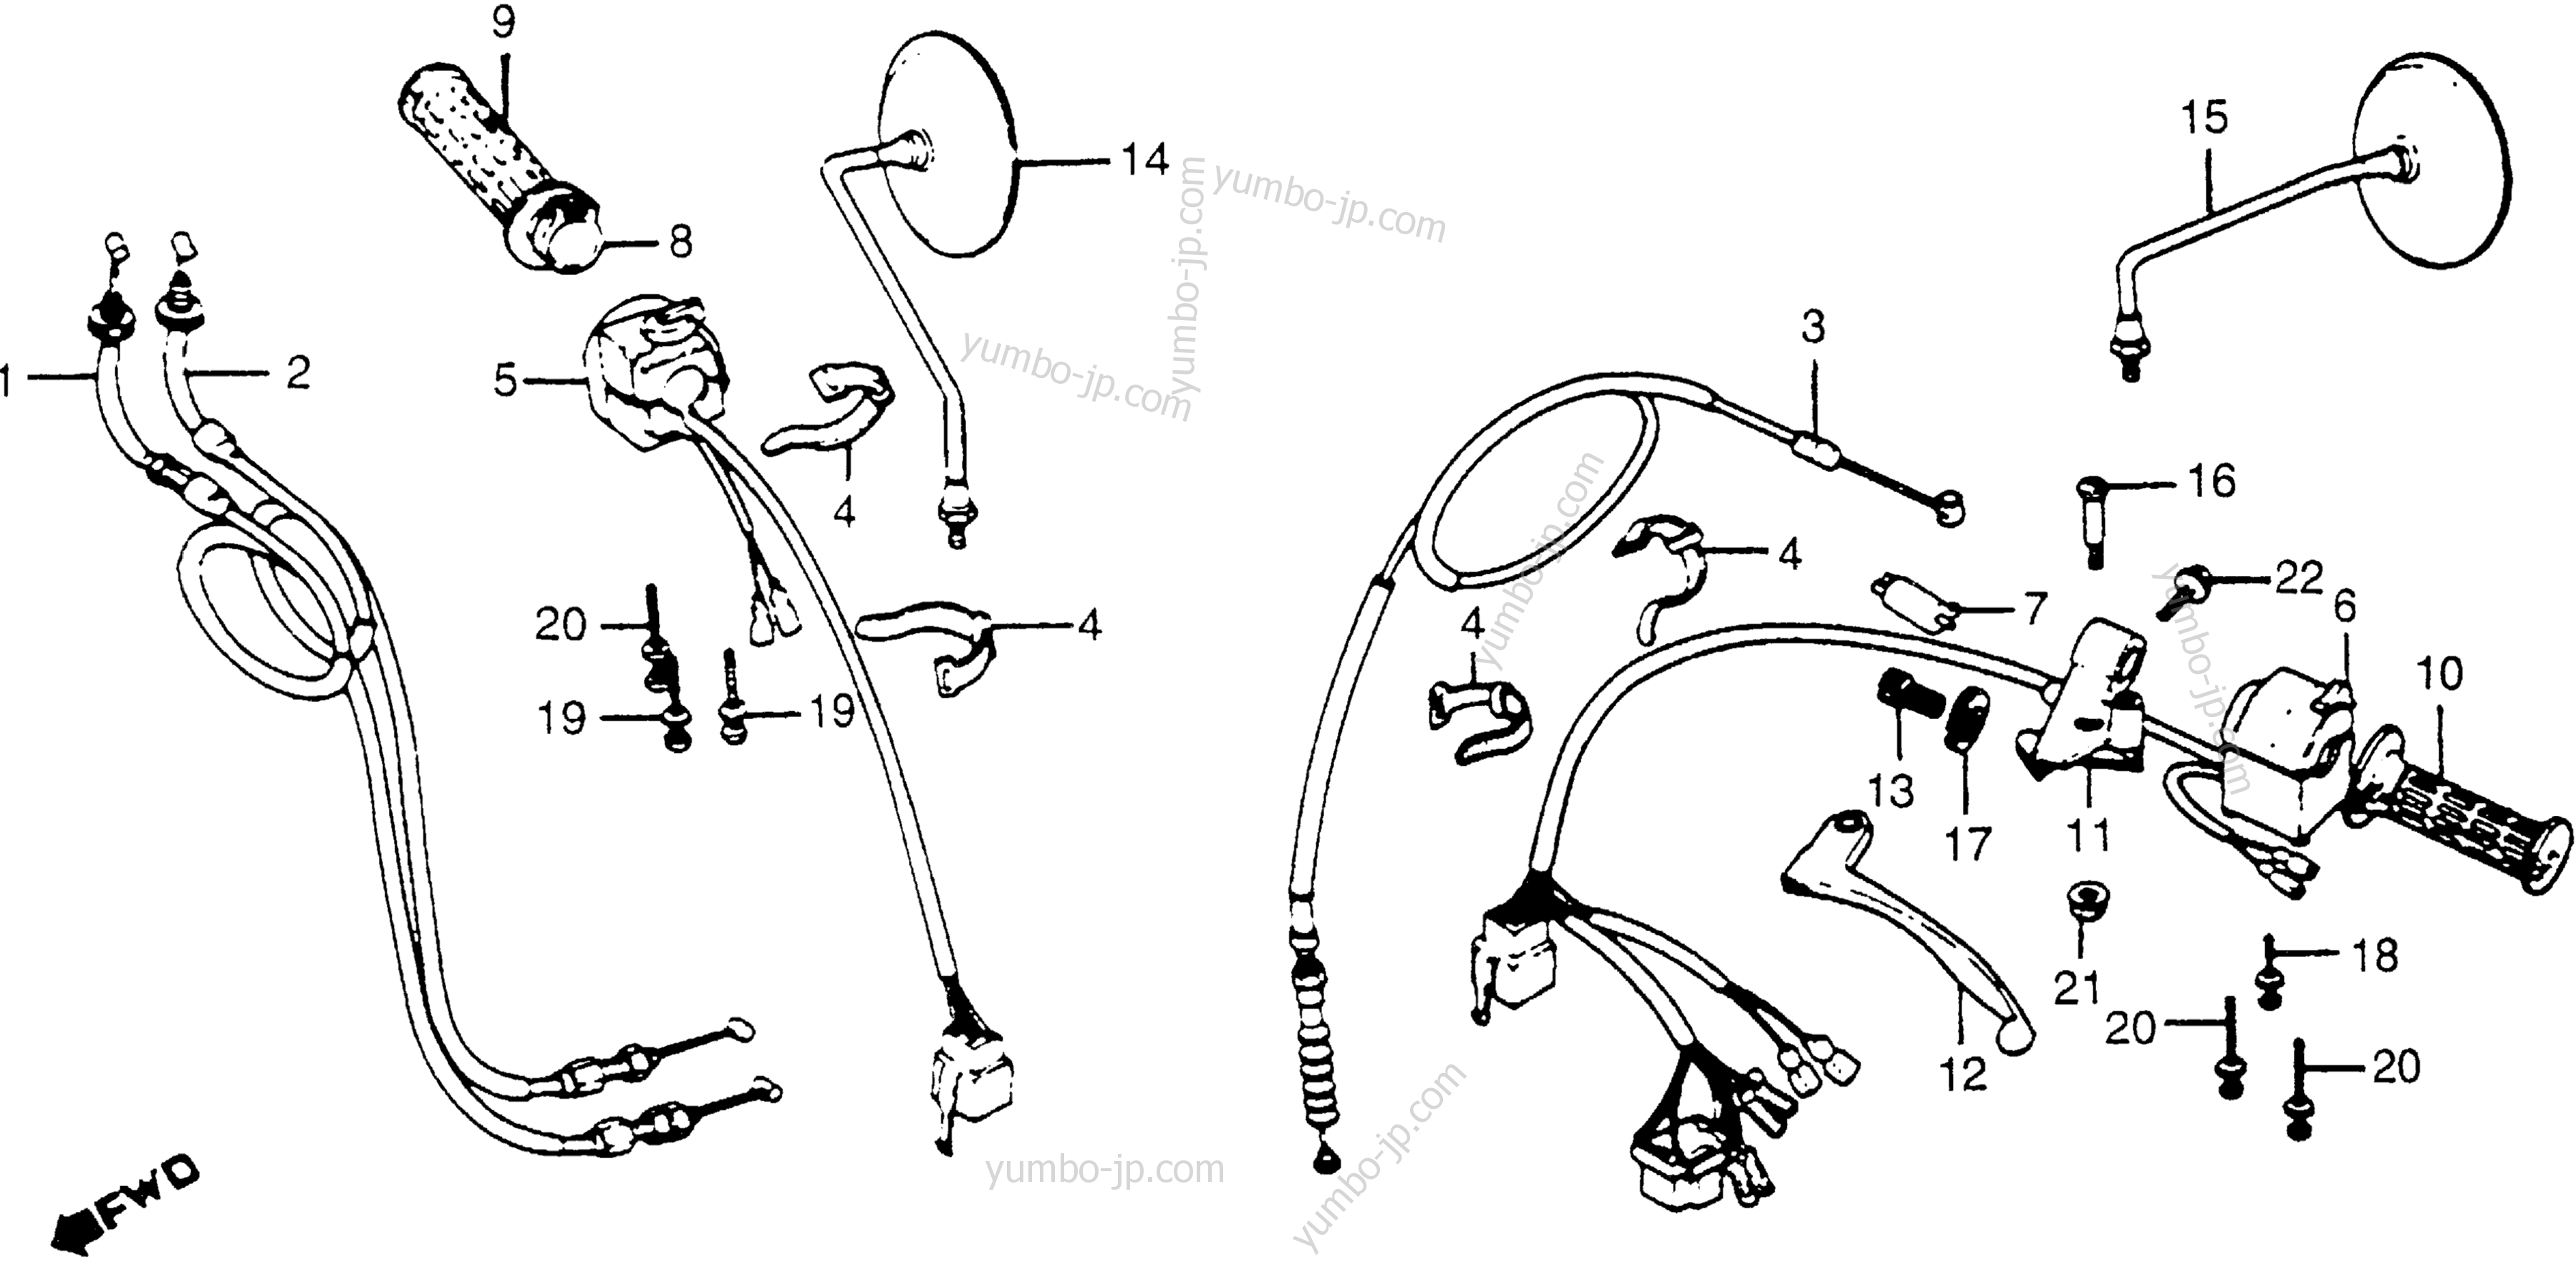 HANDLE LEVER / SWITCH / CABLE for motorcycles HONDA CB650 A 1979 year